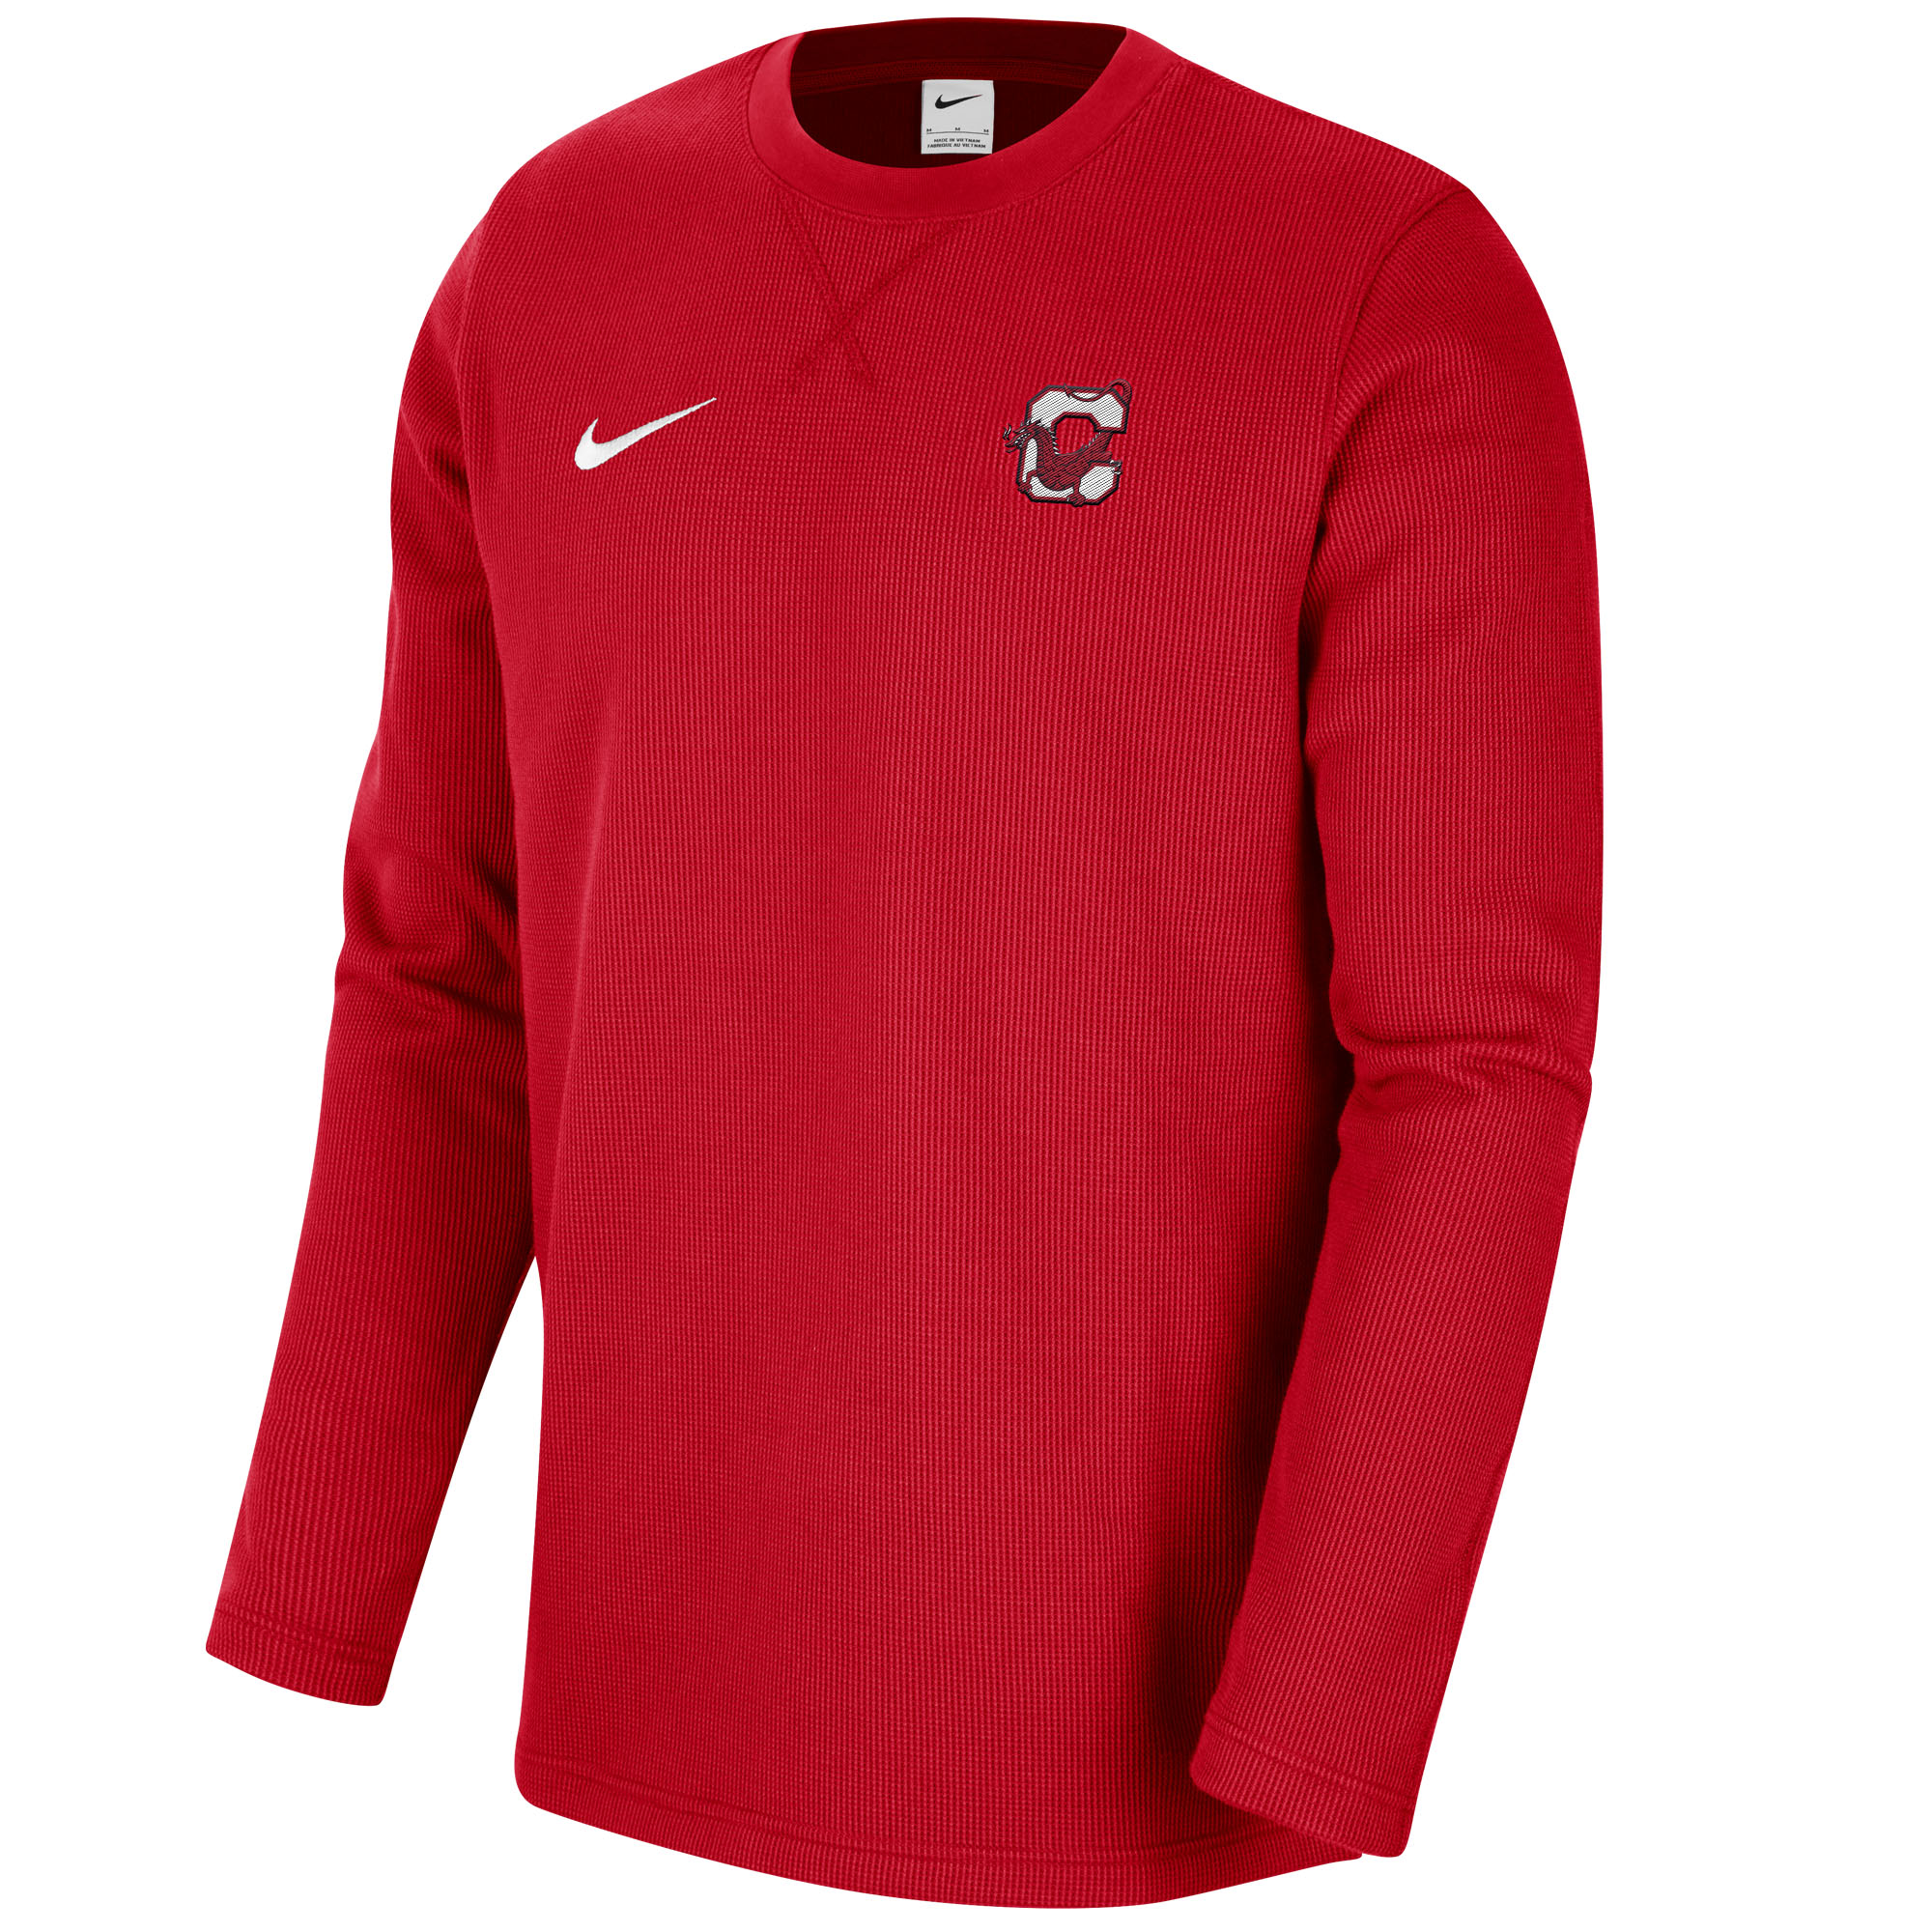 NIKE CREW LS TOP | The Campus Store